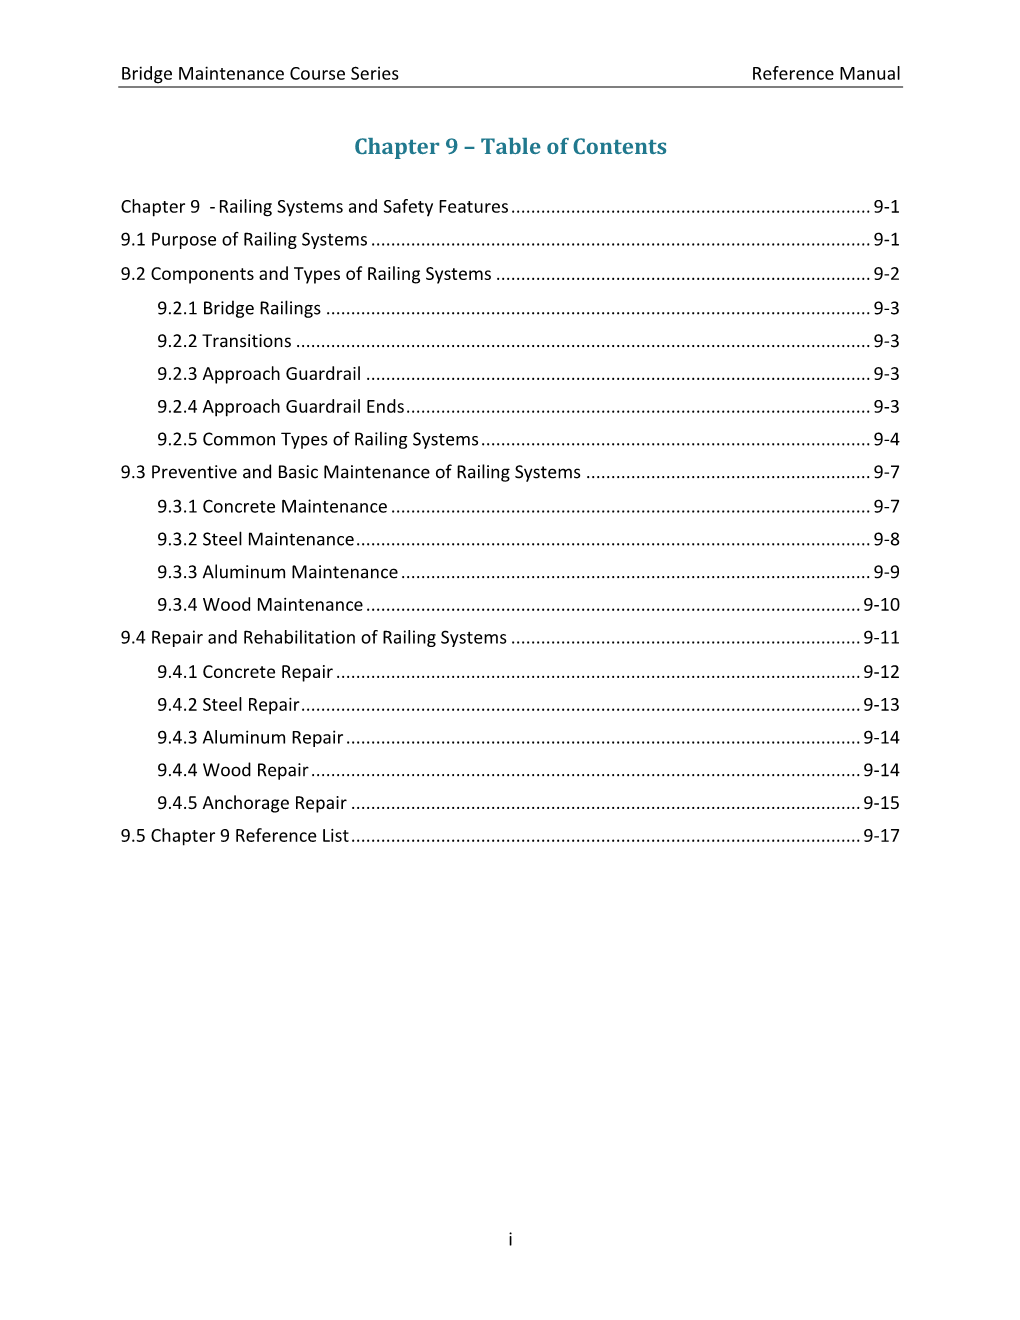 Chapter 9 – Table of Contents